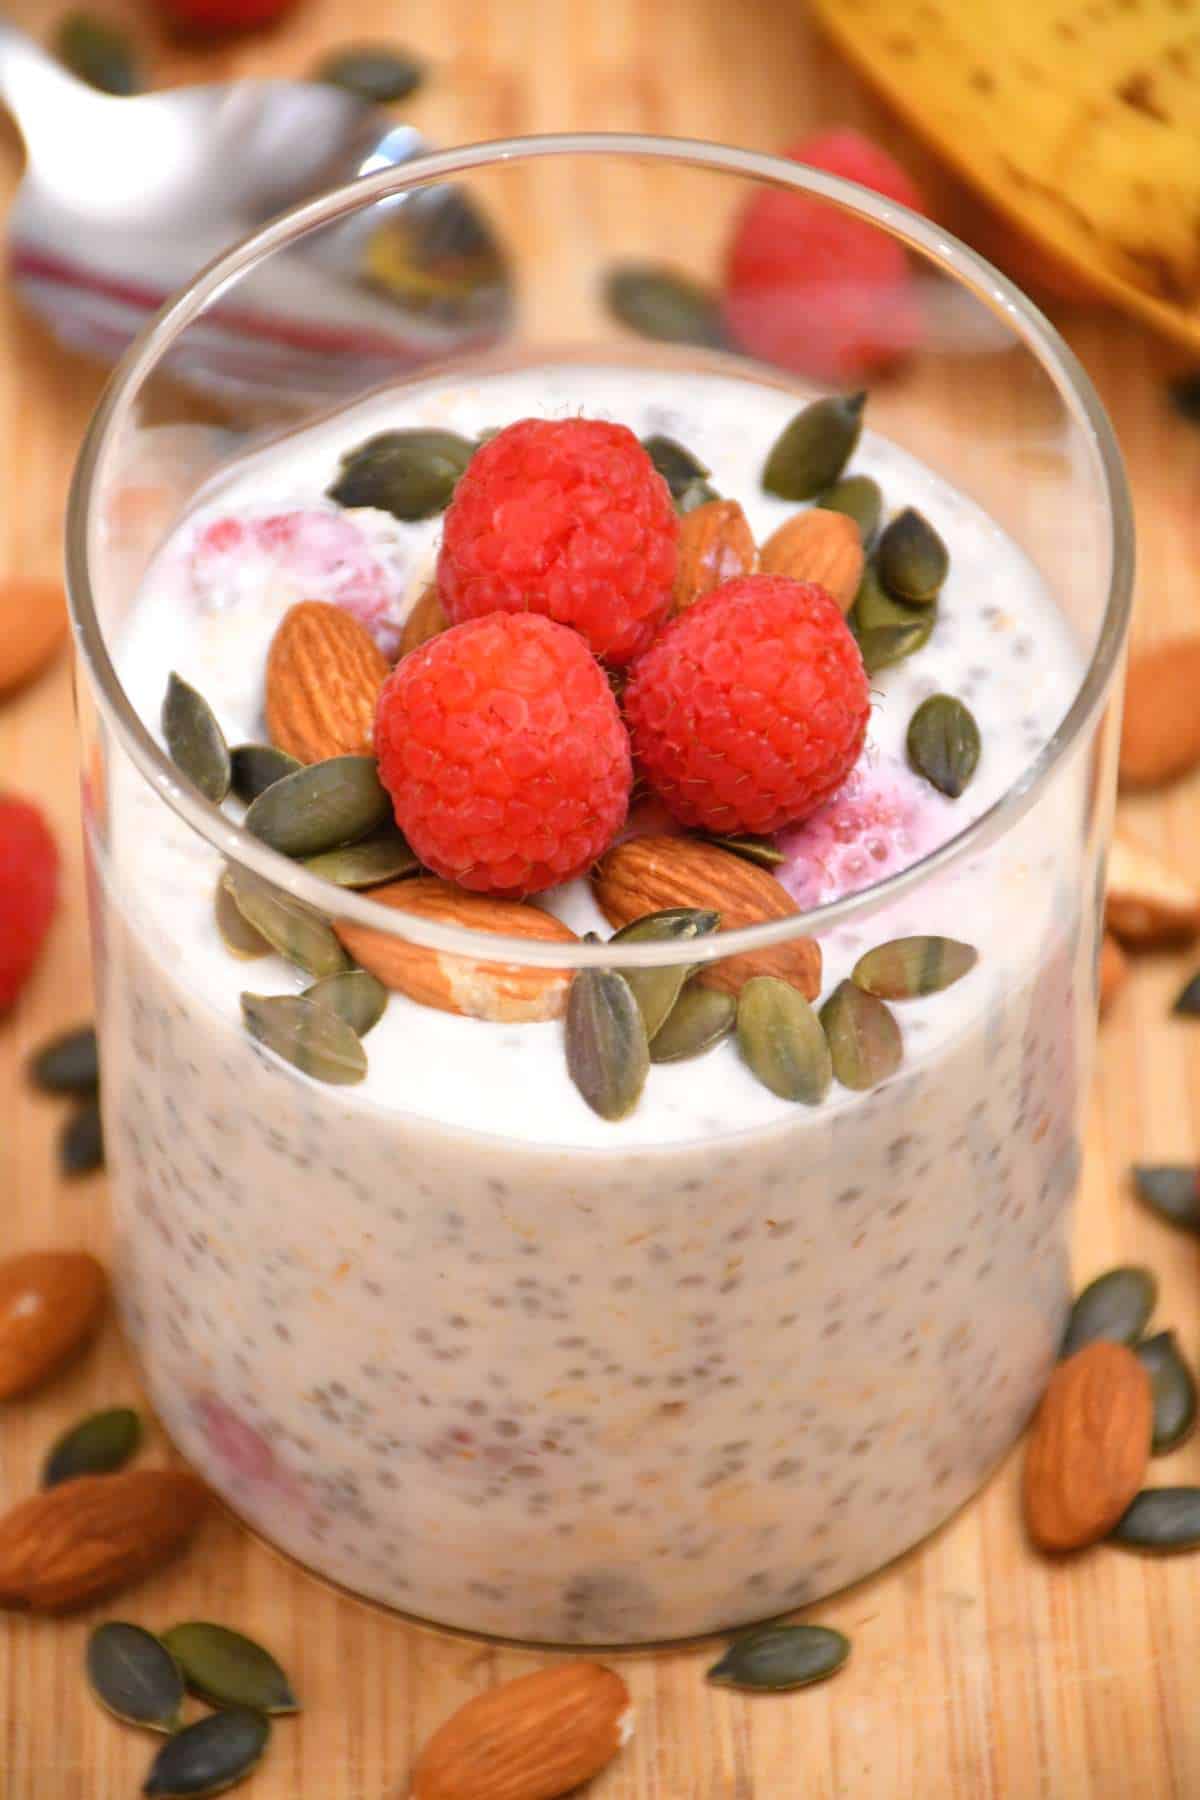 A great variation of the blueberry overnight oats made with raspberries.